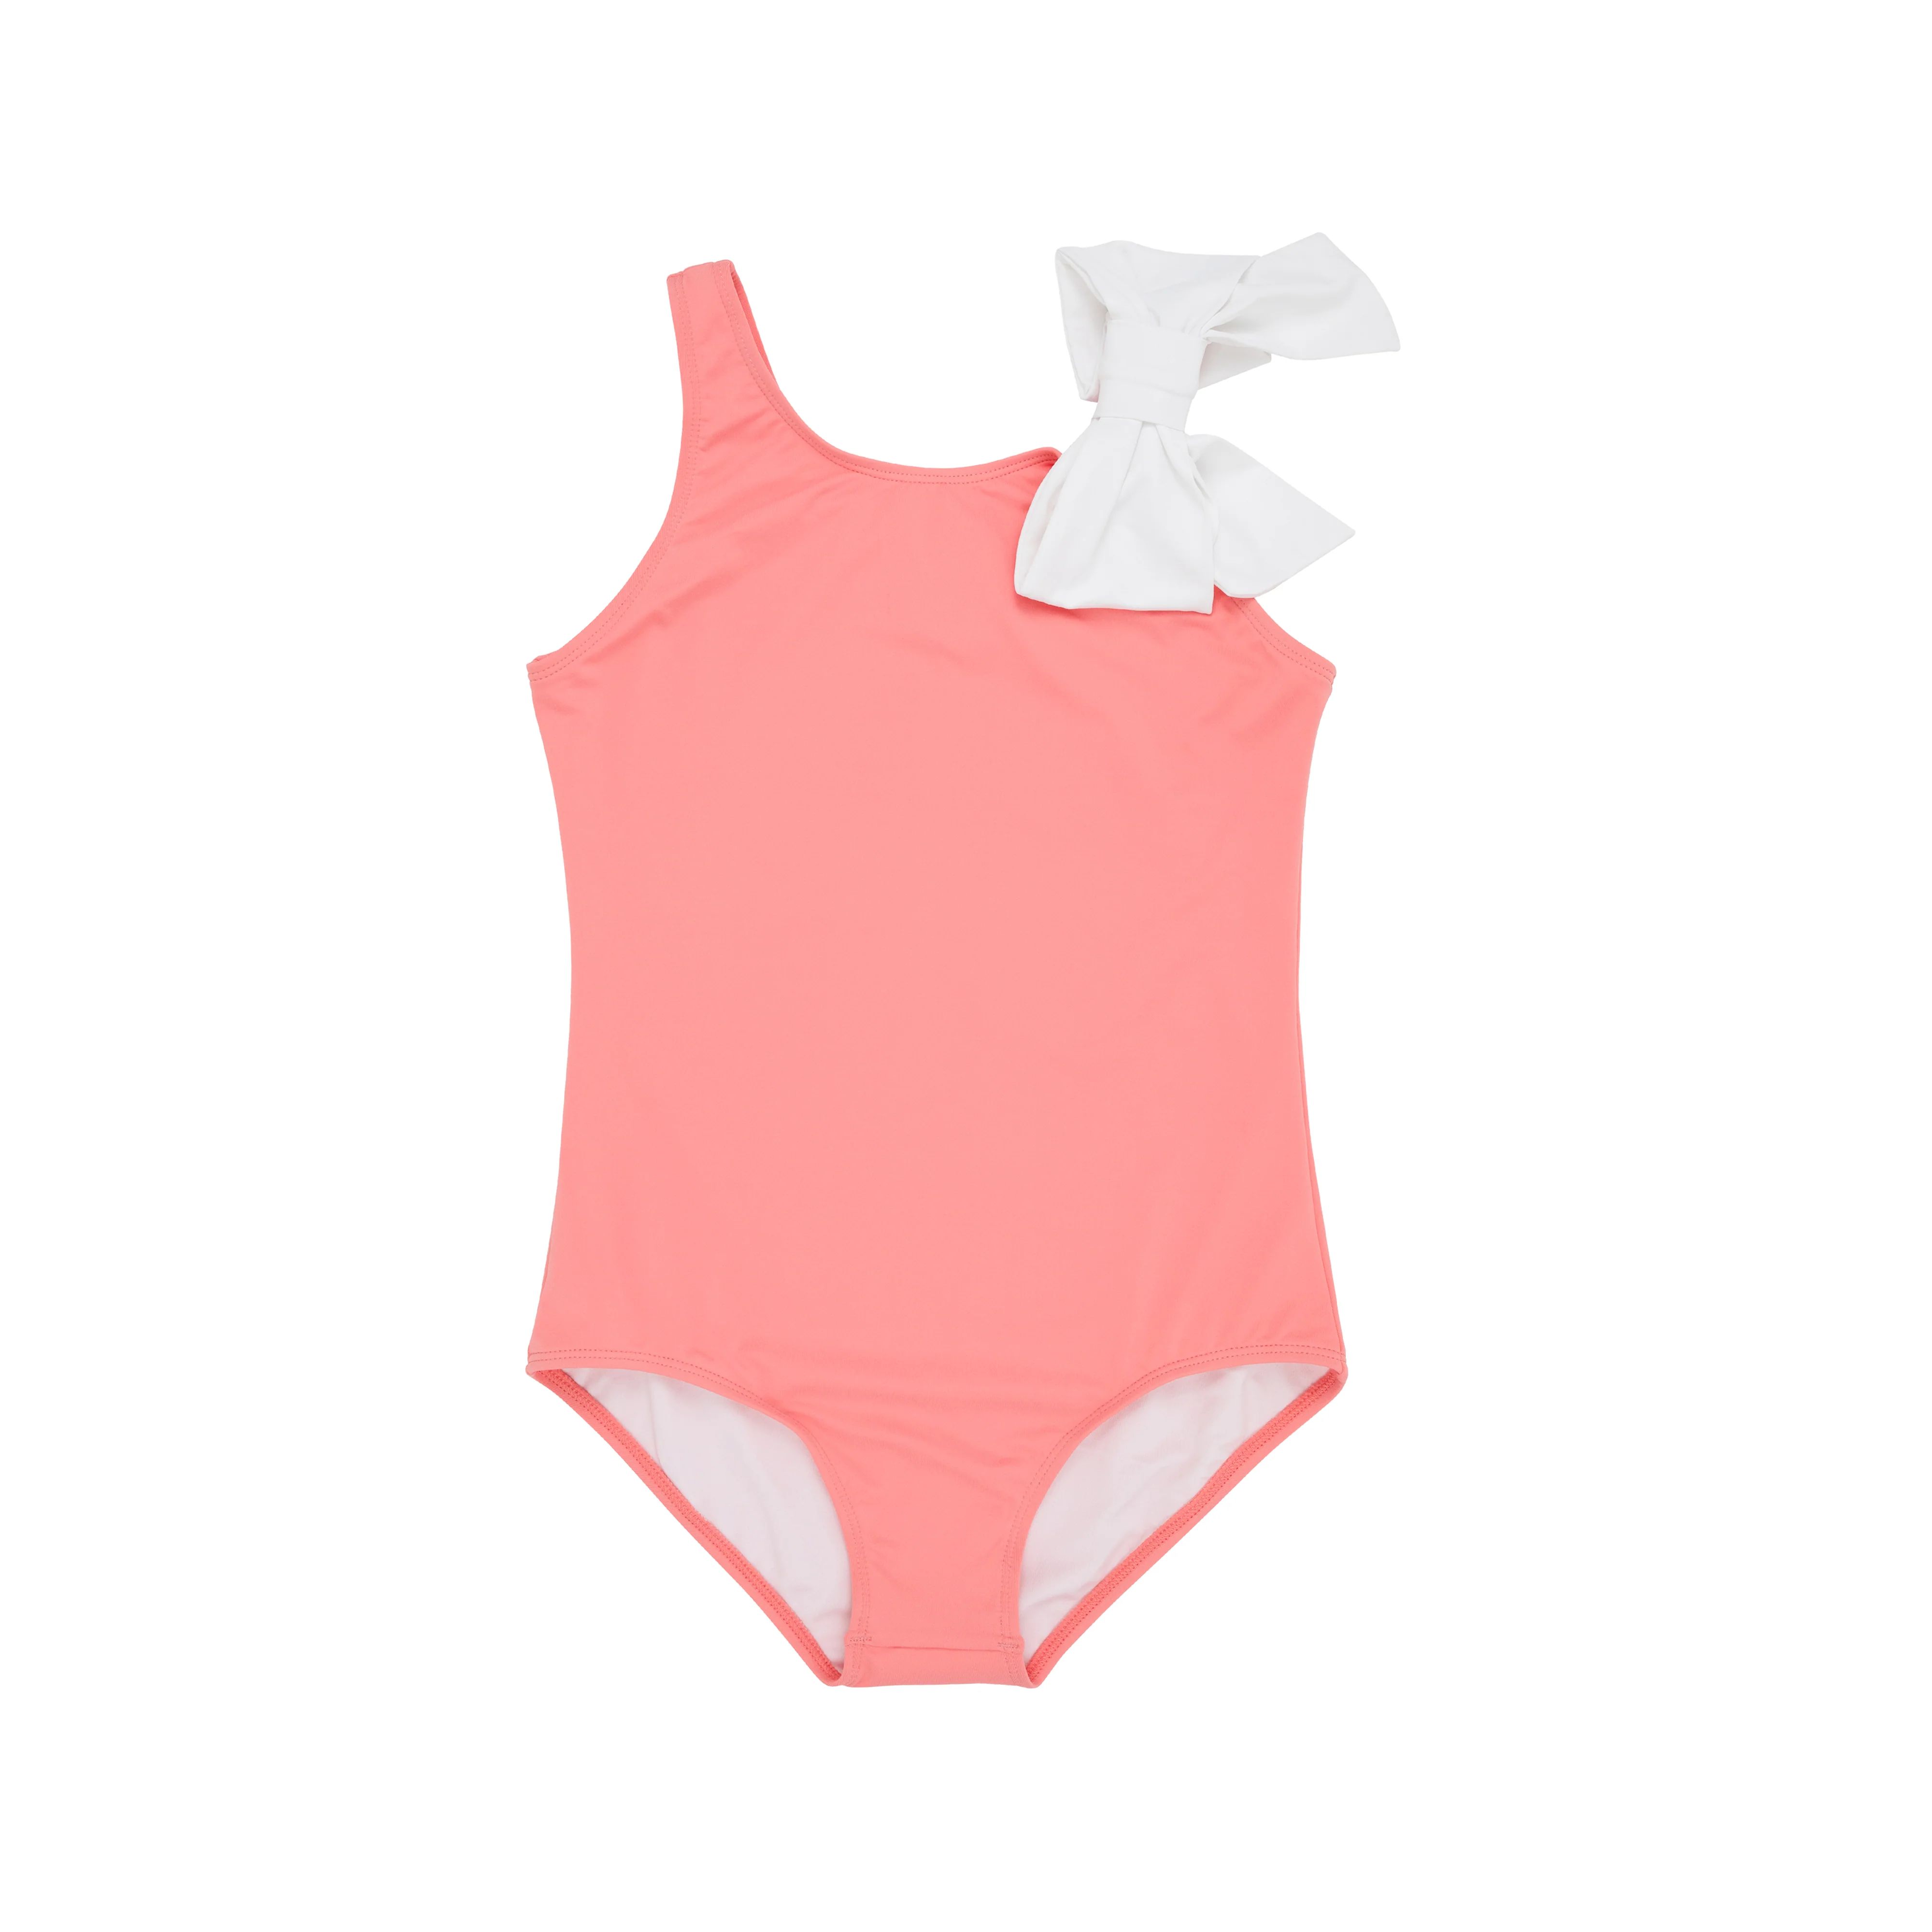 Brookhaven Bow Bathing Suit - Parrot Cay Coral with Worth Avenue White | The Beaufort Bonnet Company